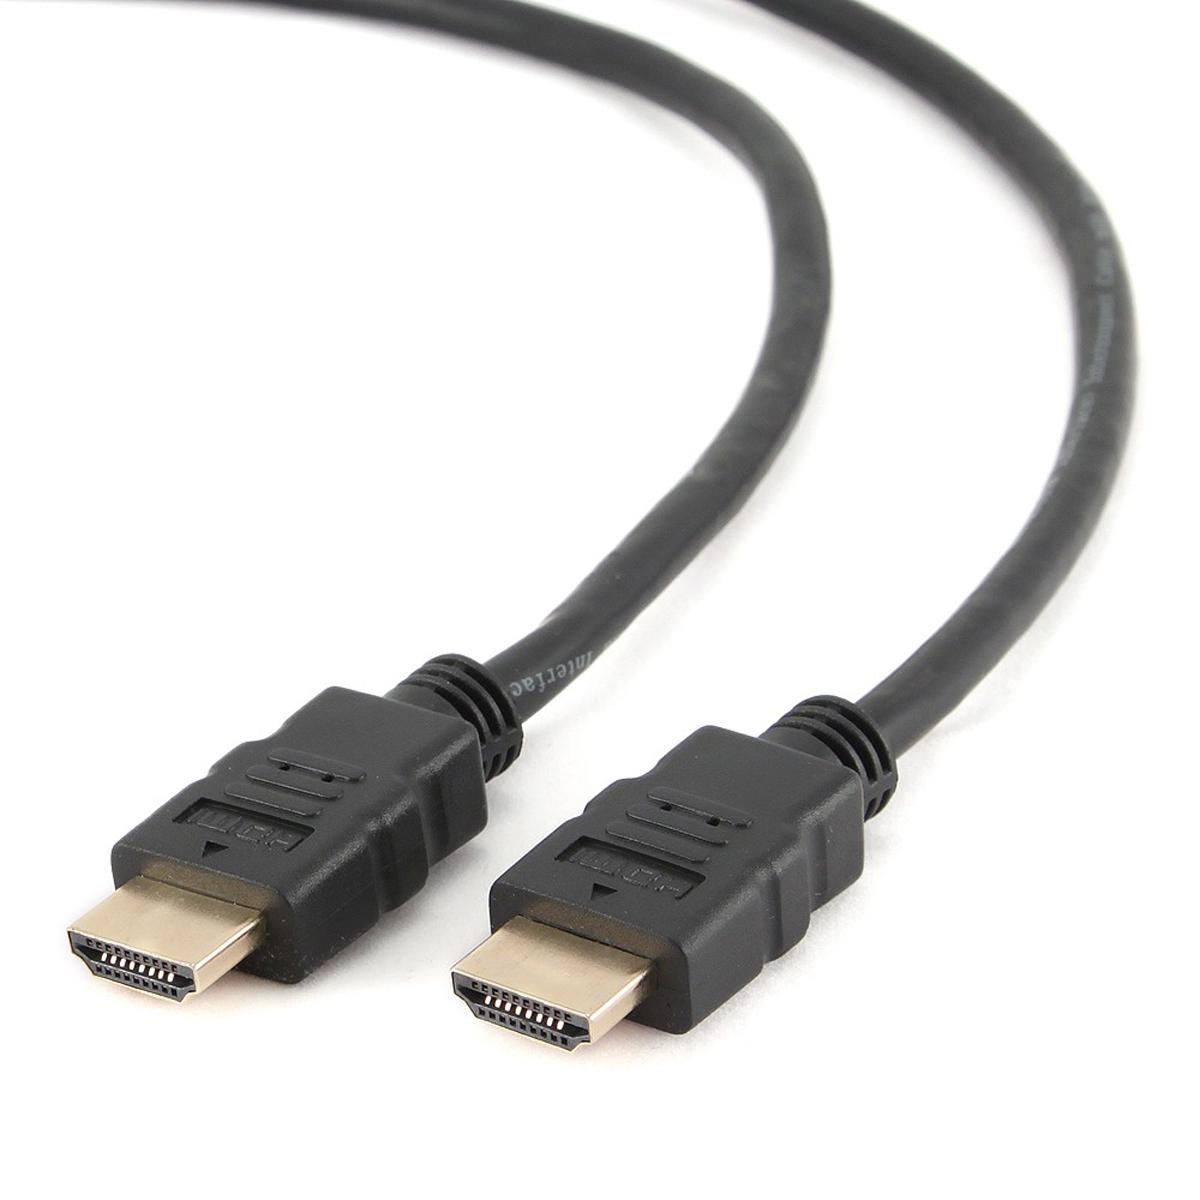 Selected image for GEMBIRD HDMI M/M kabl 4,5 m HDMI tip A (Standardni) Crno